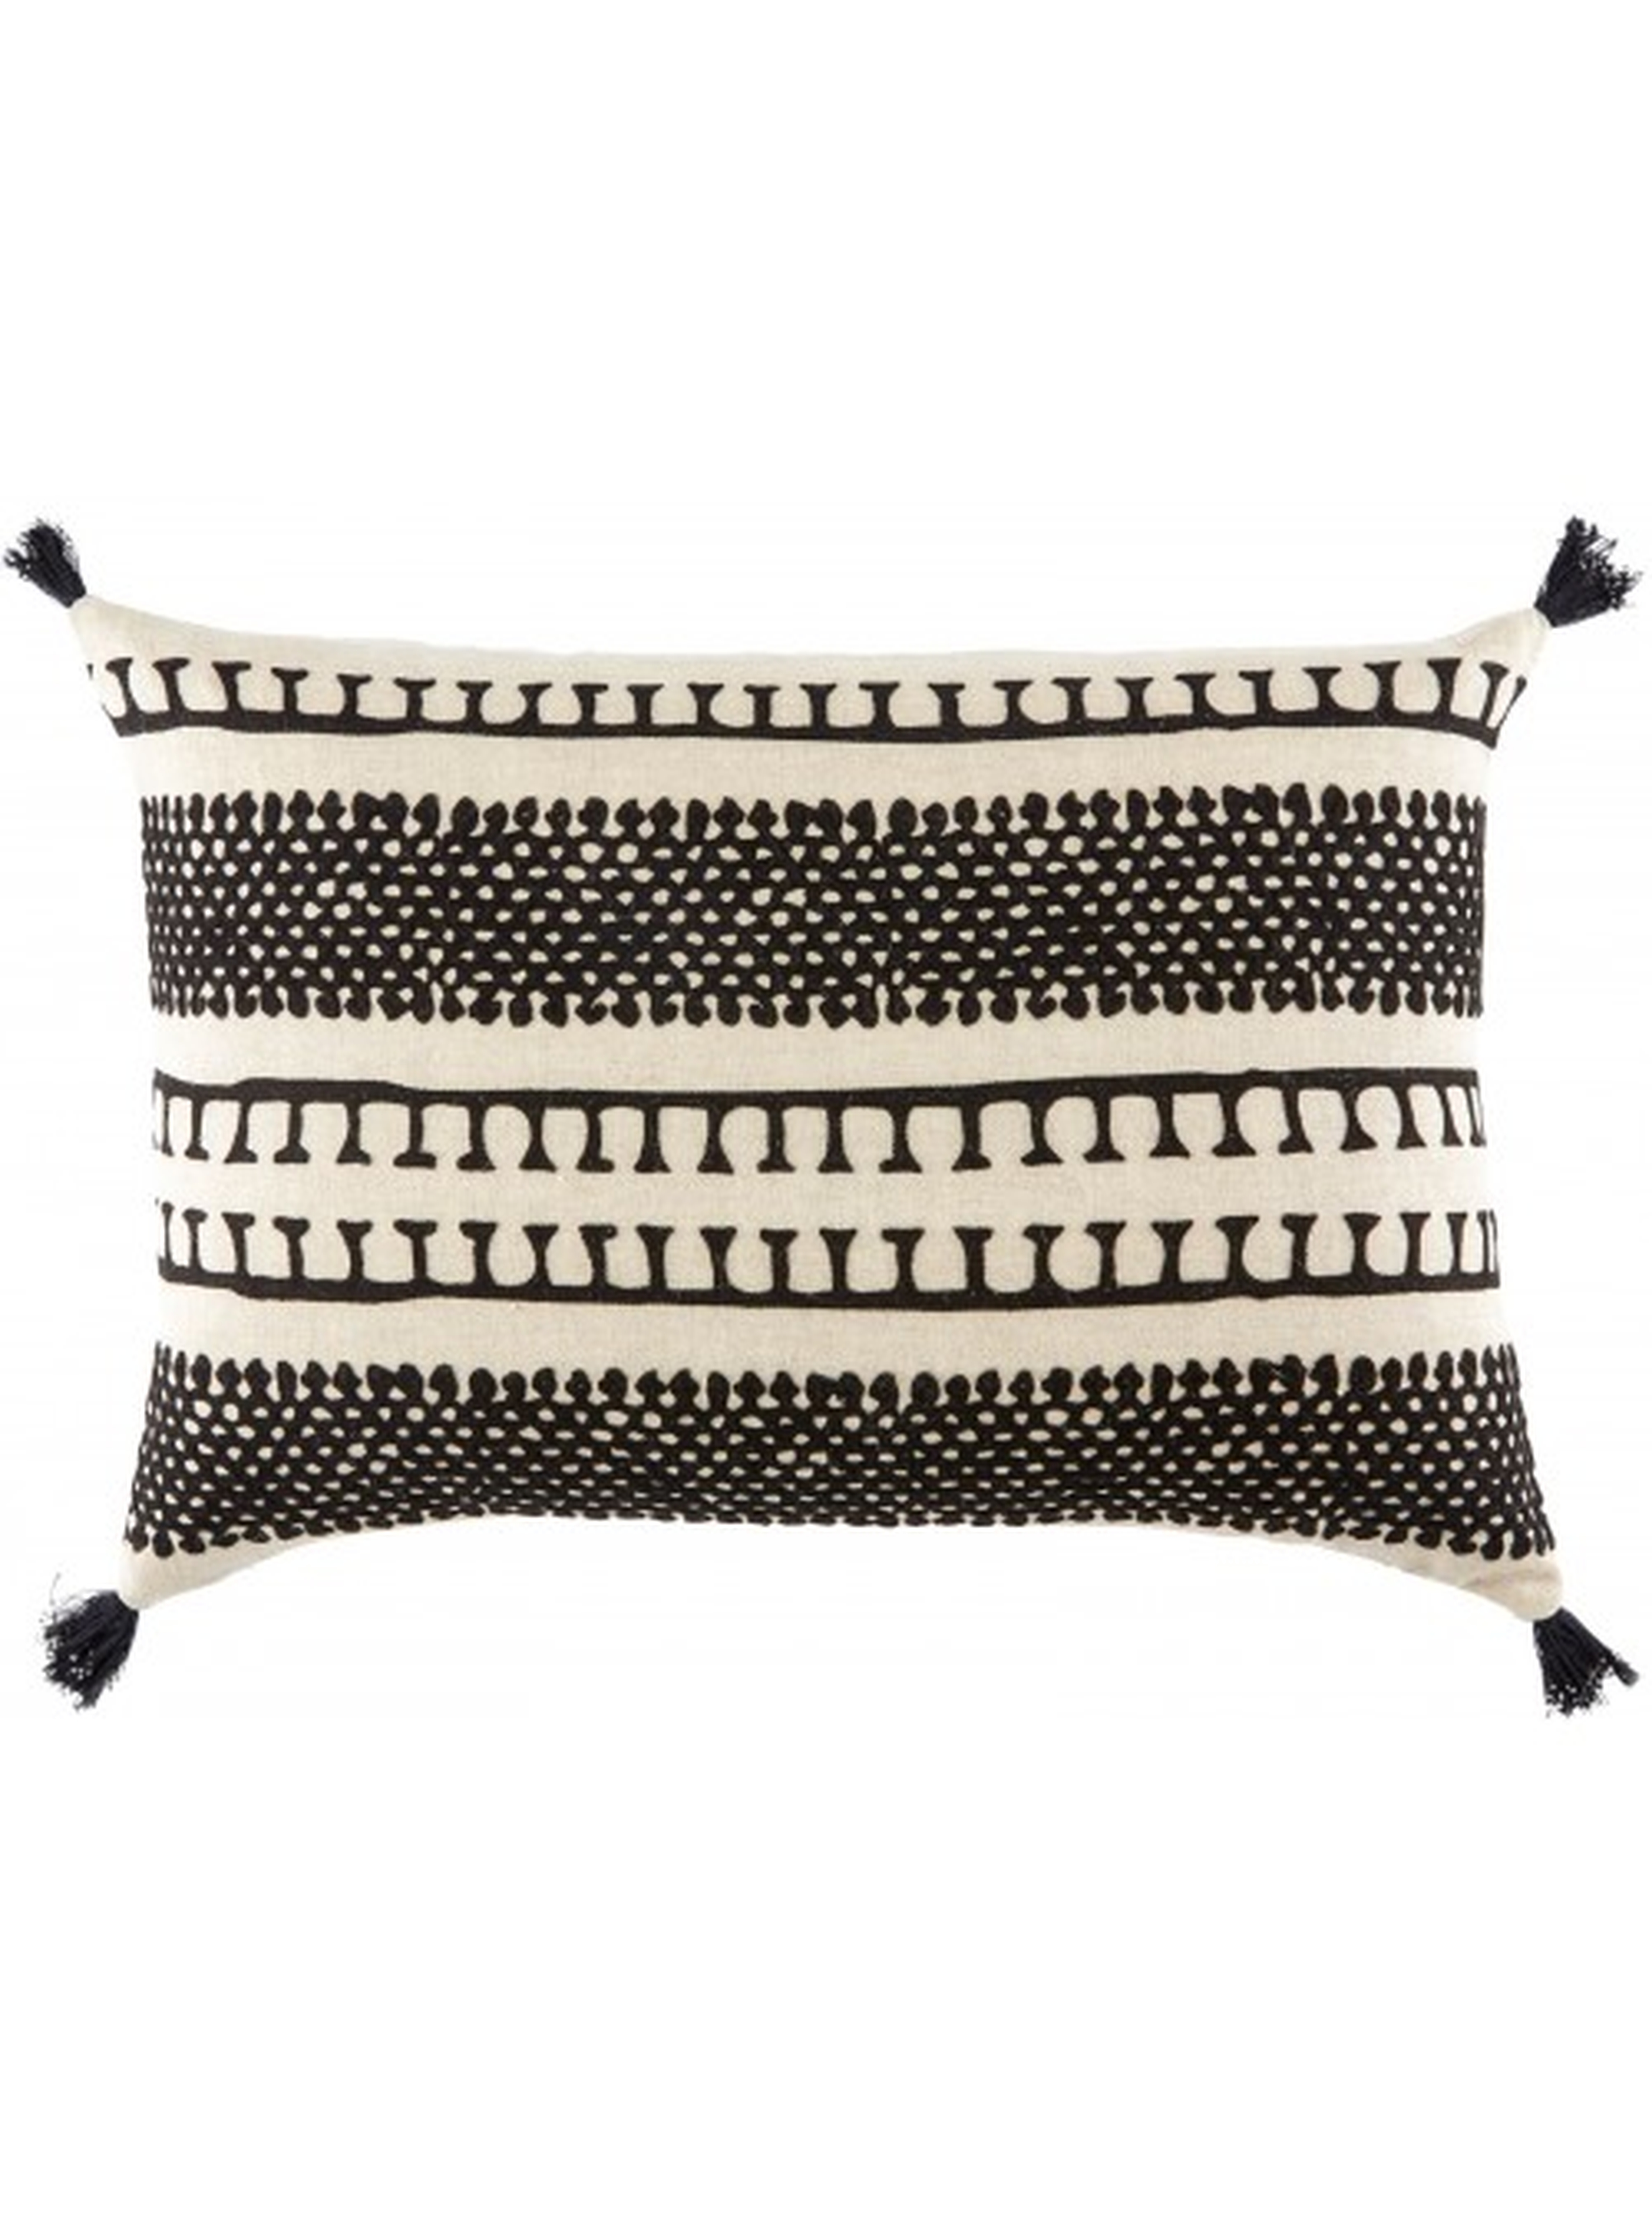 VENTUS PILLOW, BLACK AND WHITE - POLYESTER FILLED - Lulu and Georgia